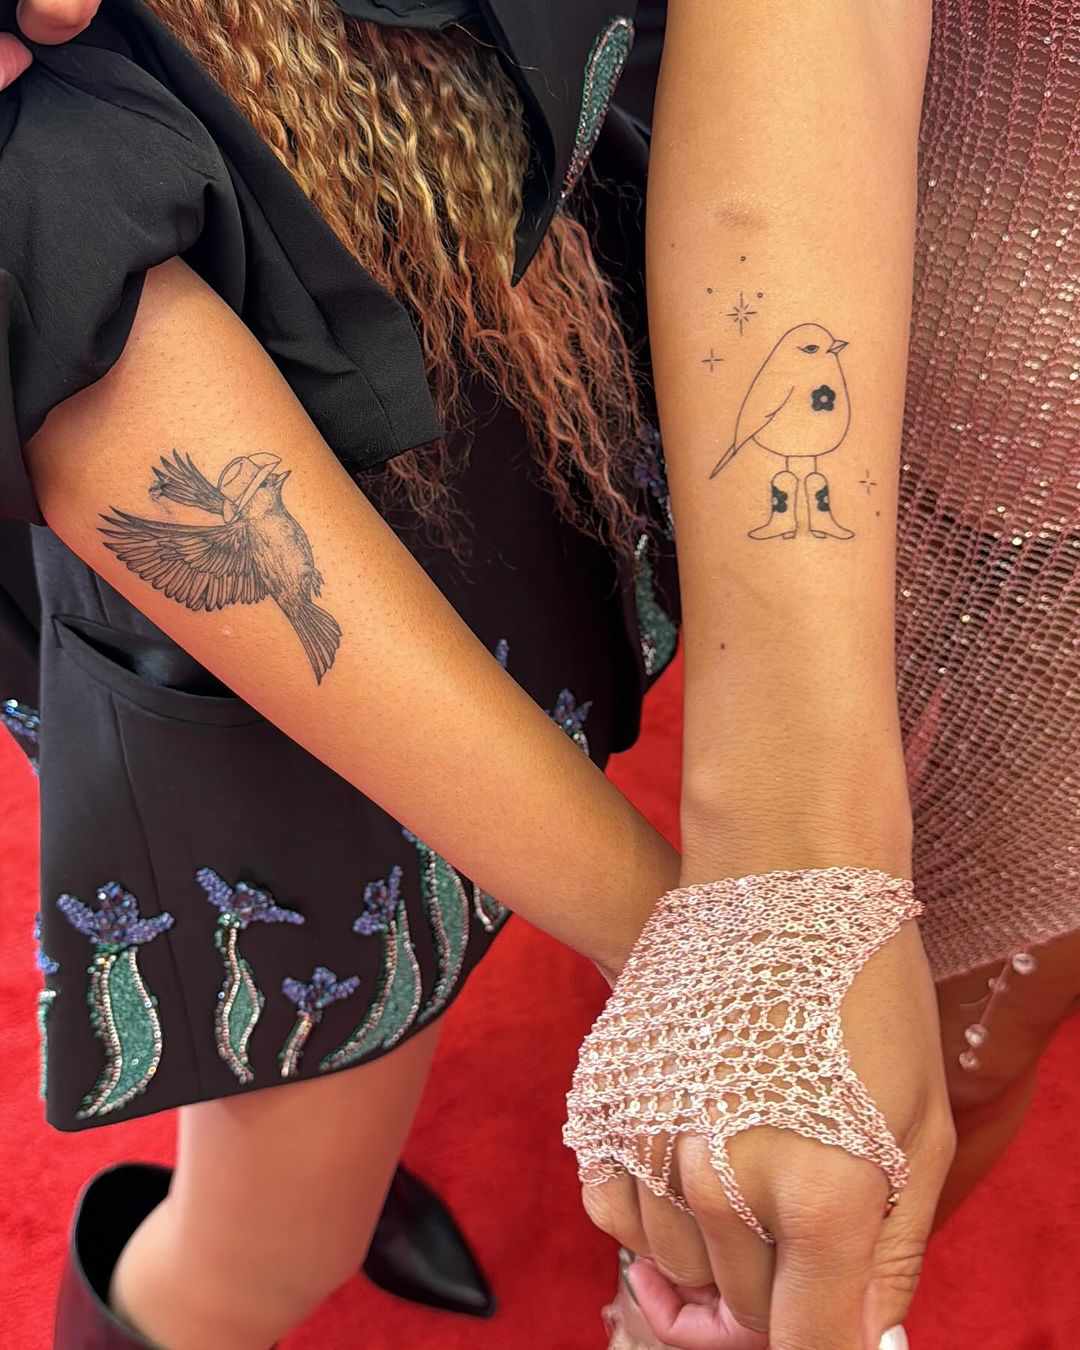 Tanner Adell Beyonce collaborators matching tattoos